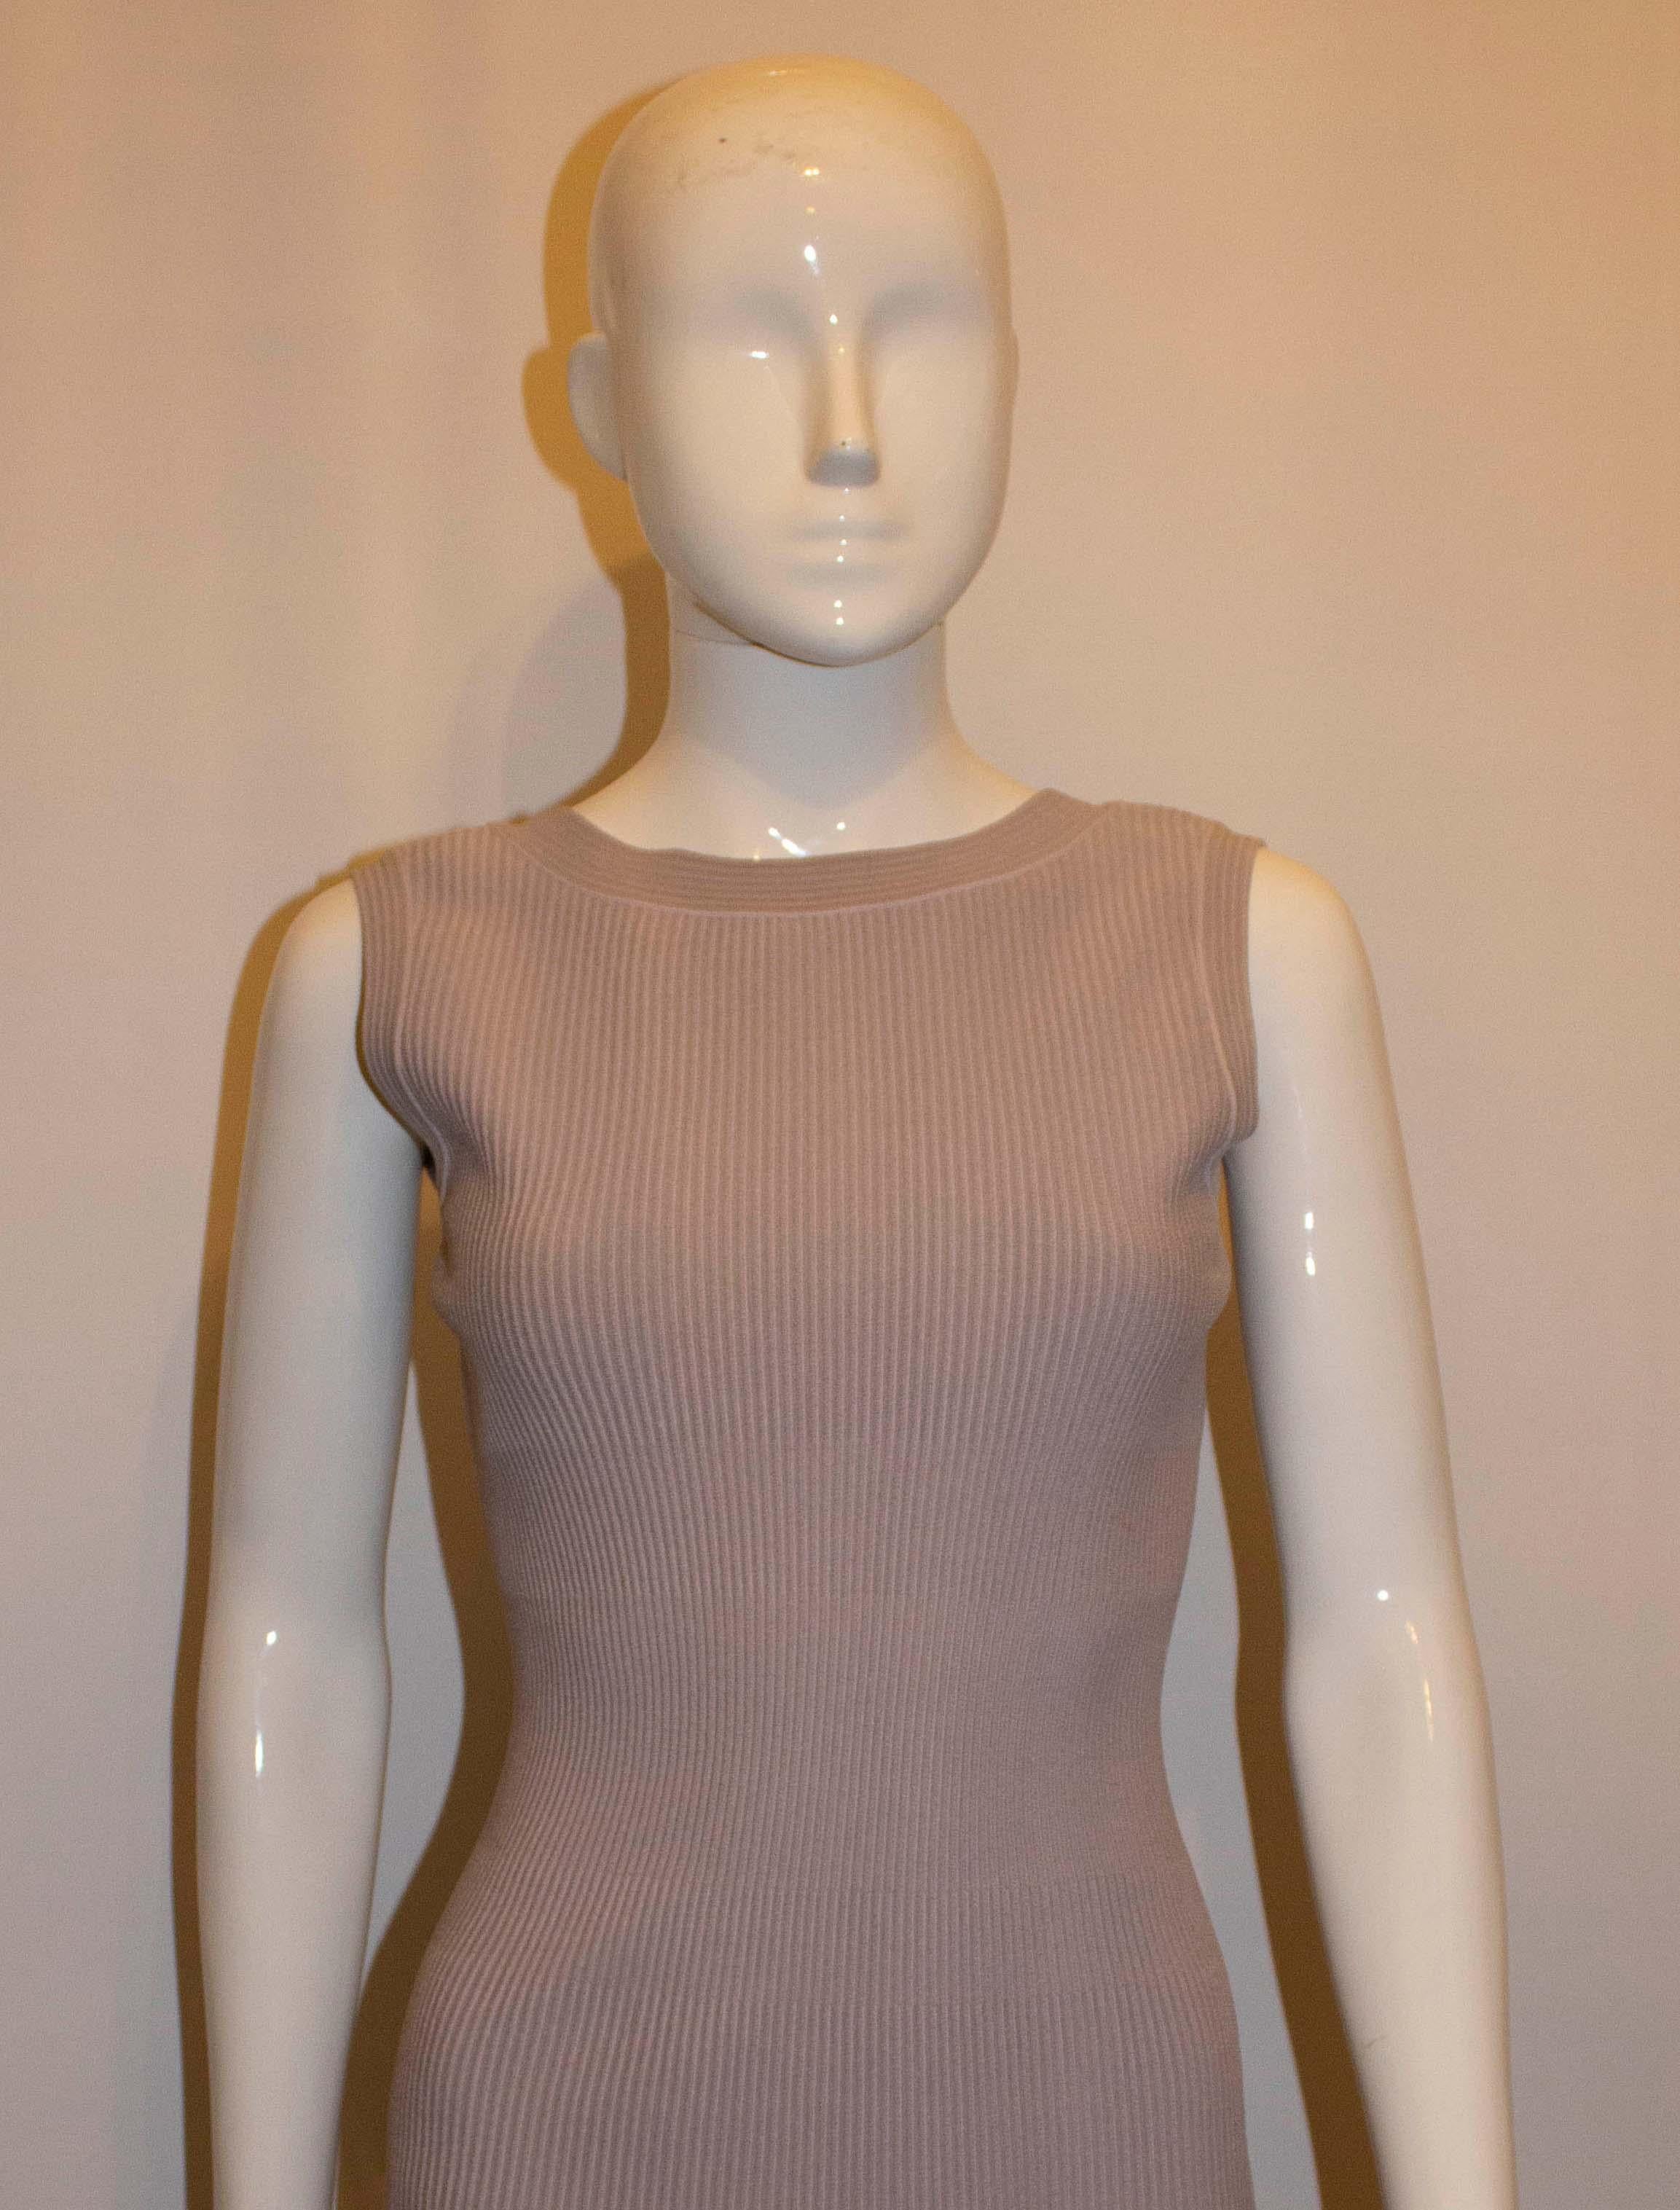  Azzedine Alaia Paris, Dove Grey Drop Waist Dress In Good Condition For Sale In London, GB